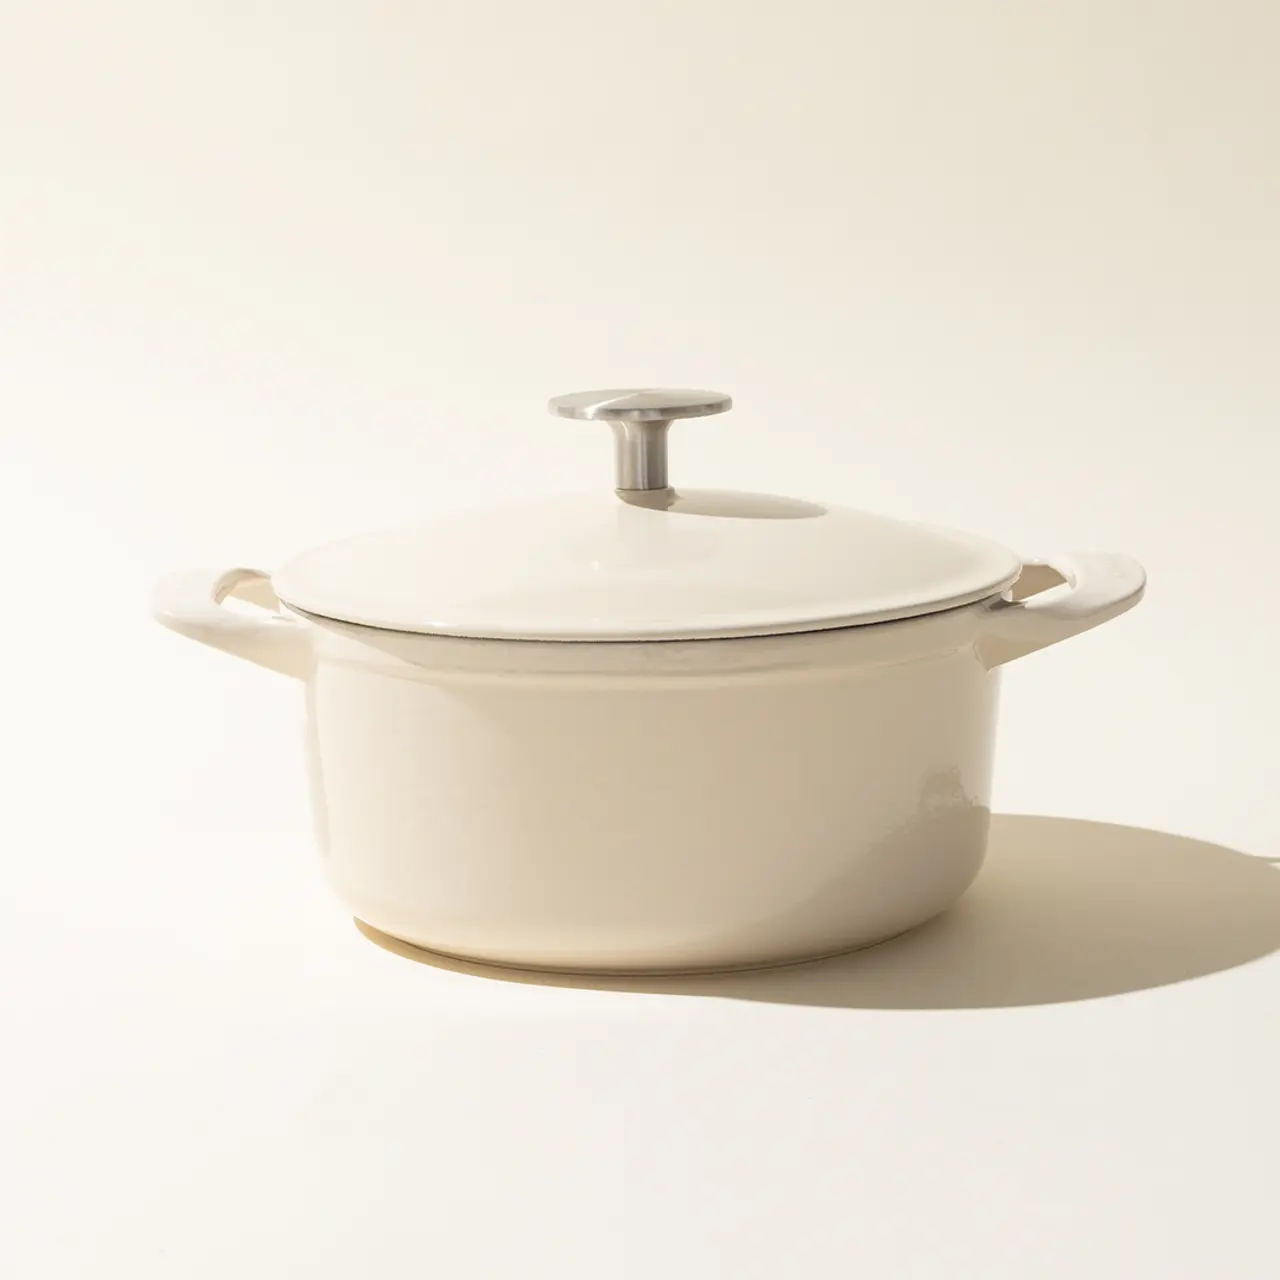 A cream-colored cooking pot with a lid on a light neutral background, casting a soft shadow.